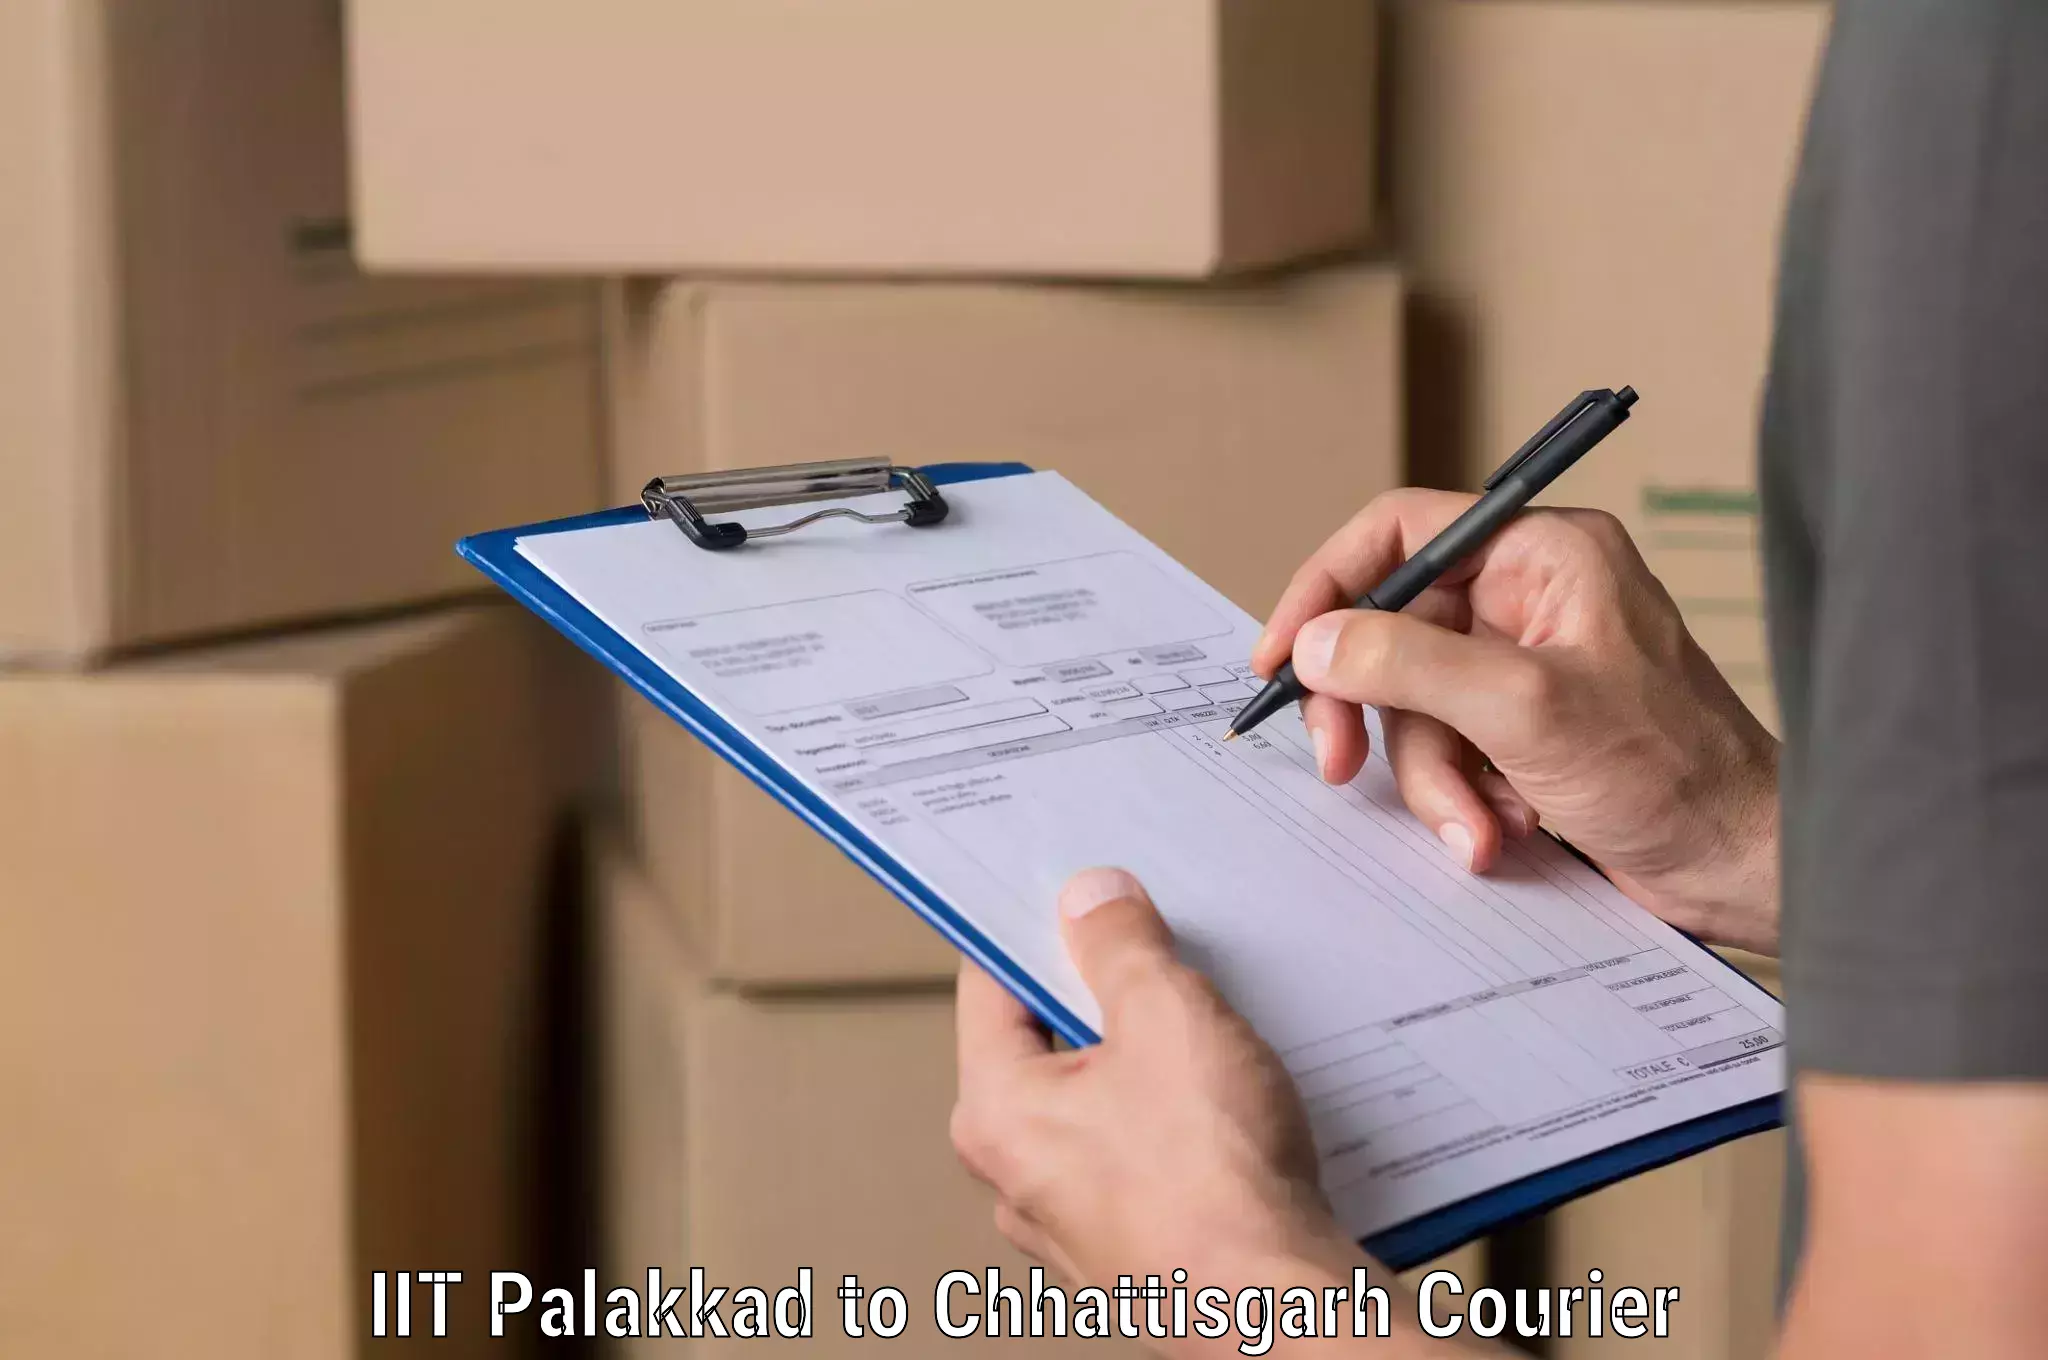 Residential courier service IIT Palakkad to Raigarh